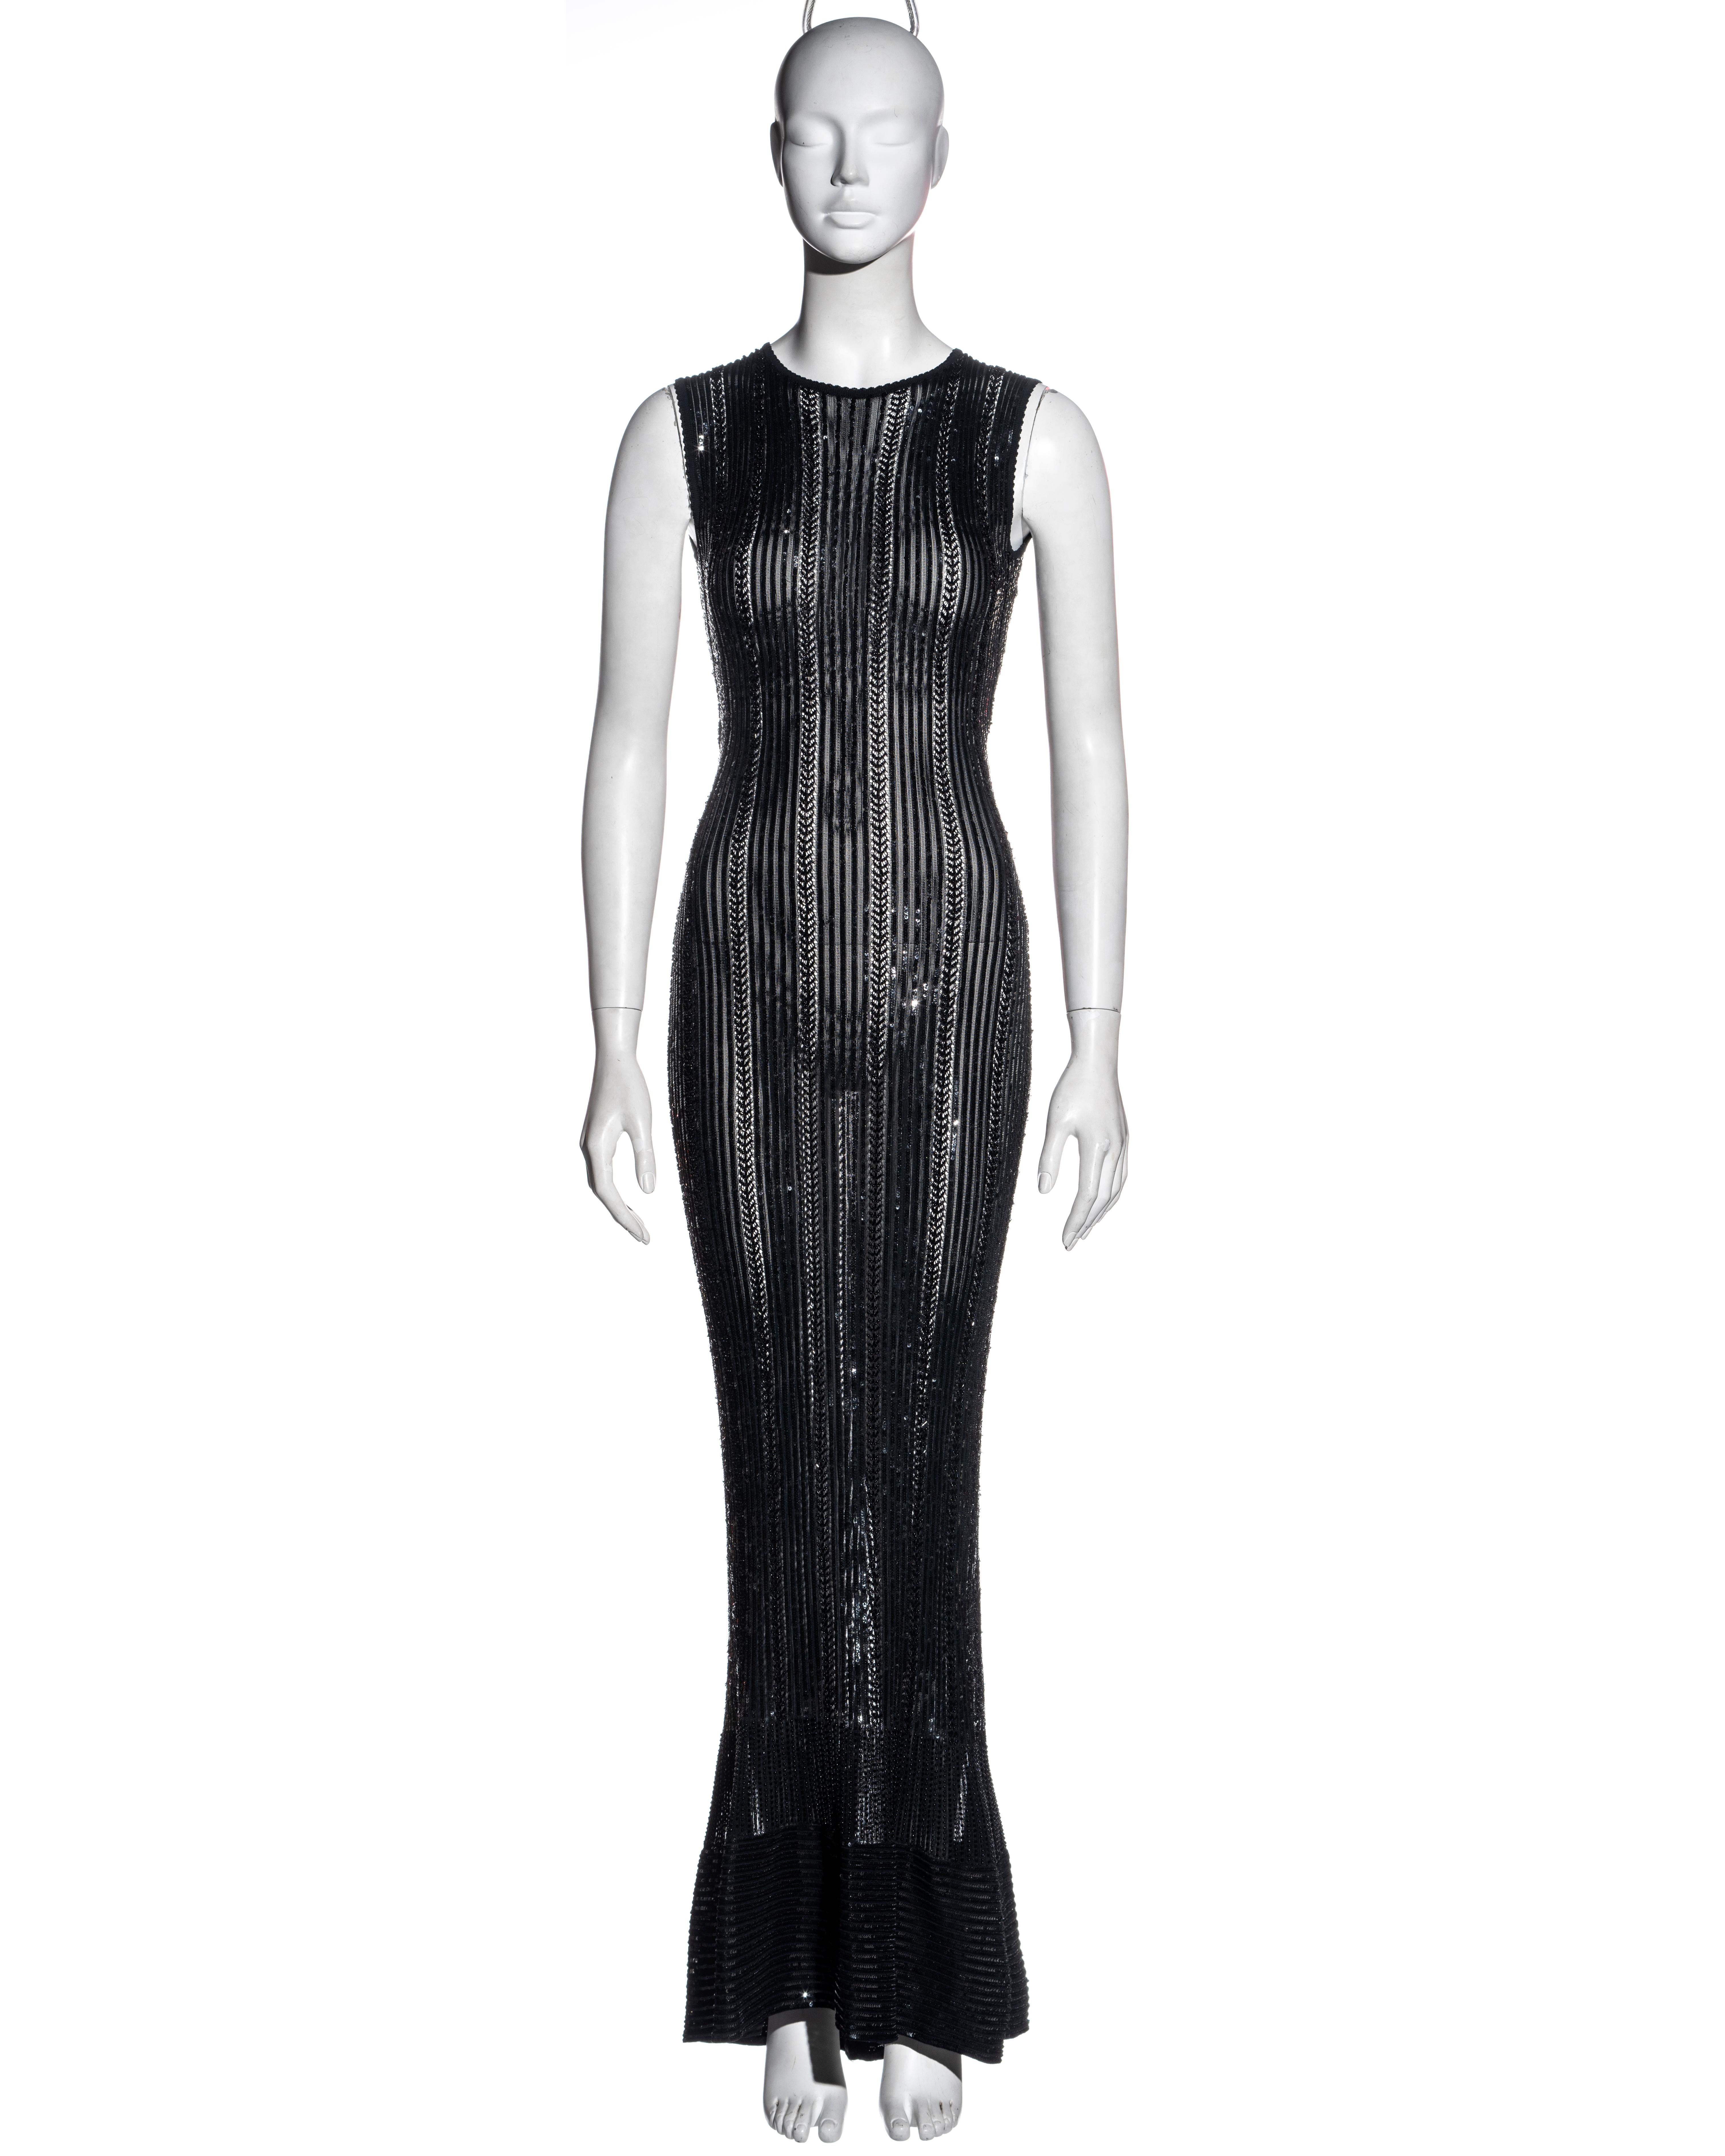 ▪ Azzedine Alaia black floor-length evening dress
▪ Bead and sequins embellished in a vertical striped pattern 
▪ Open-knit 
▪ Figure-hugging 
▪ Floor-length mermaid skirt 
▪ Size Small
▪ Spring-Summer 1996
▪ 100% Viscose 
▪ Made in Italy